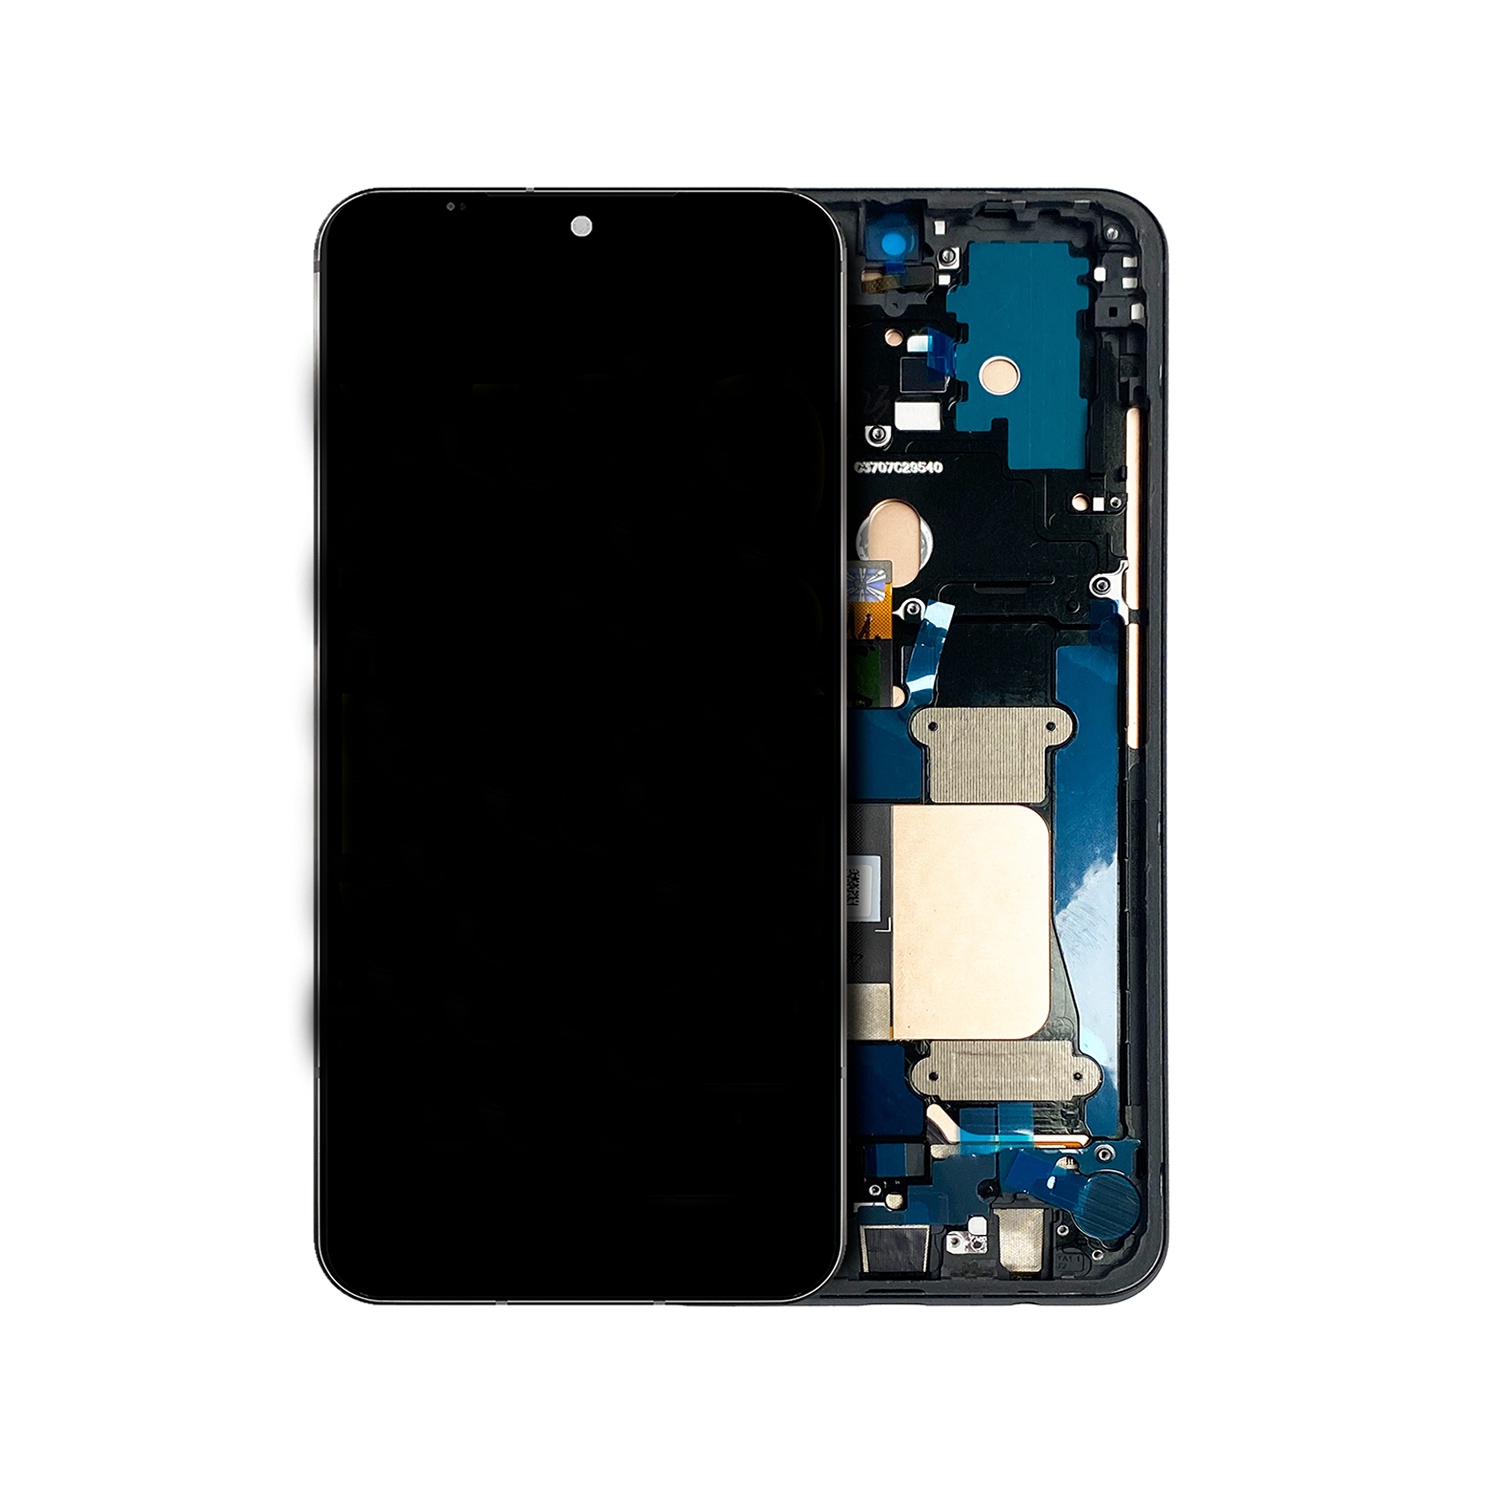 Refurbished (Excellent) - Replacement OLED Display Touch Screen Digitizer Assembly With Frame For LG V60 ThinQ 5G - Black